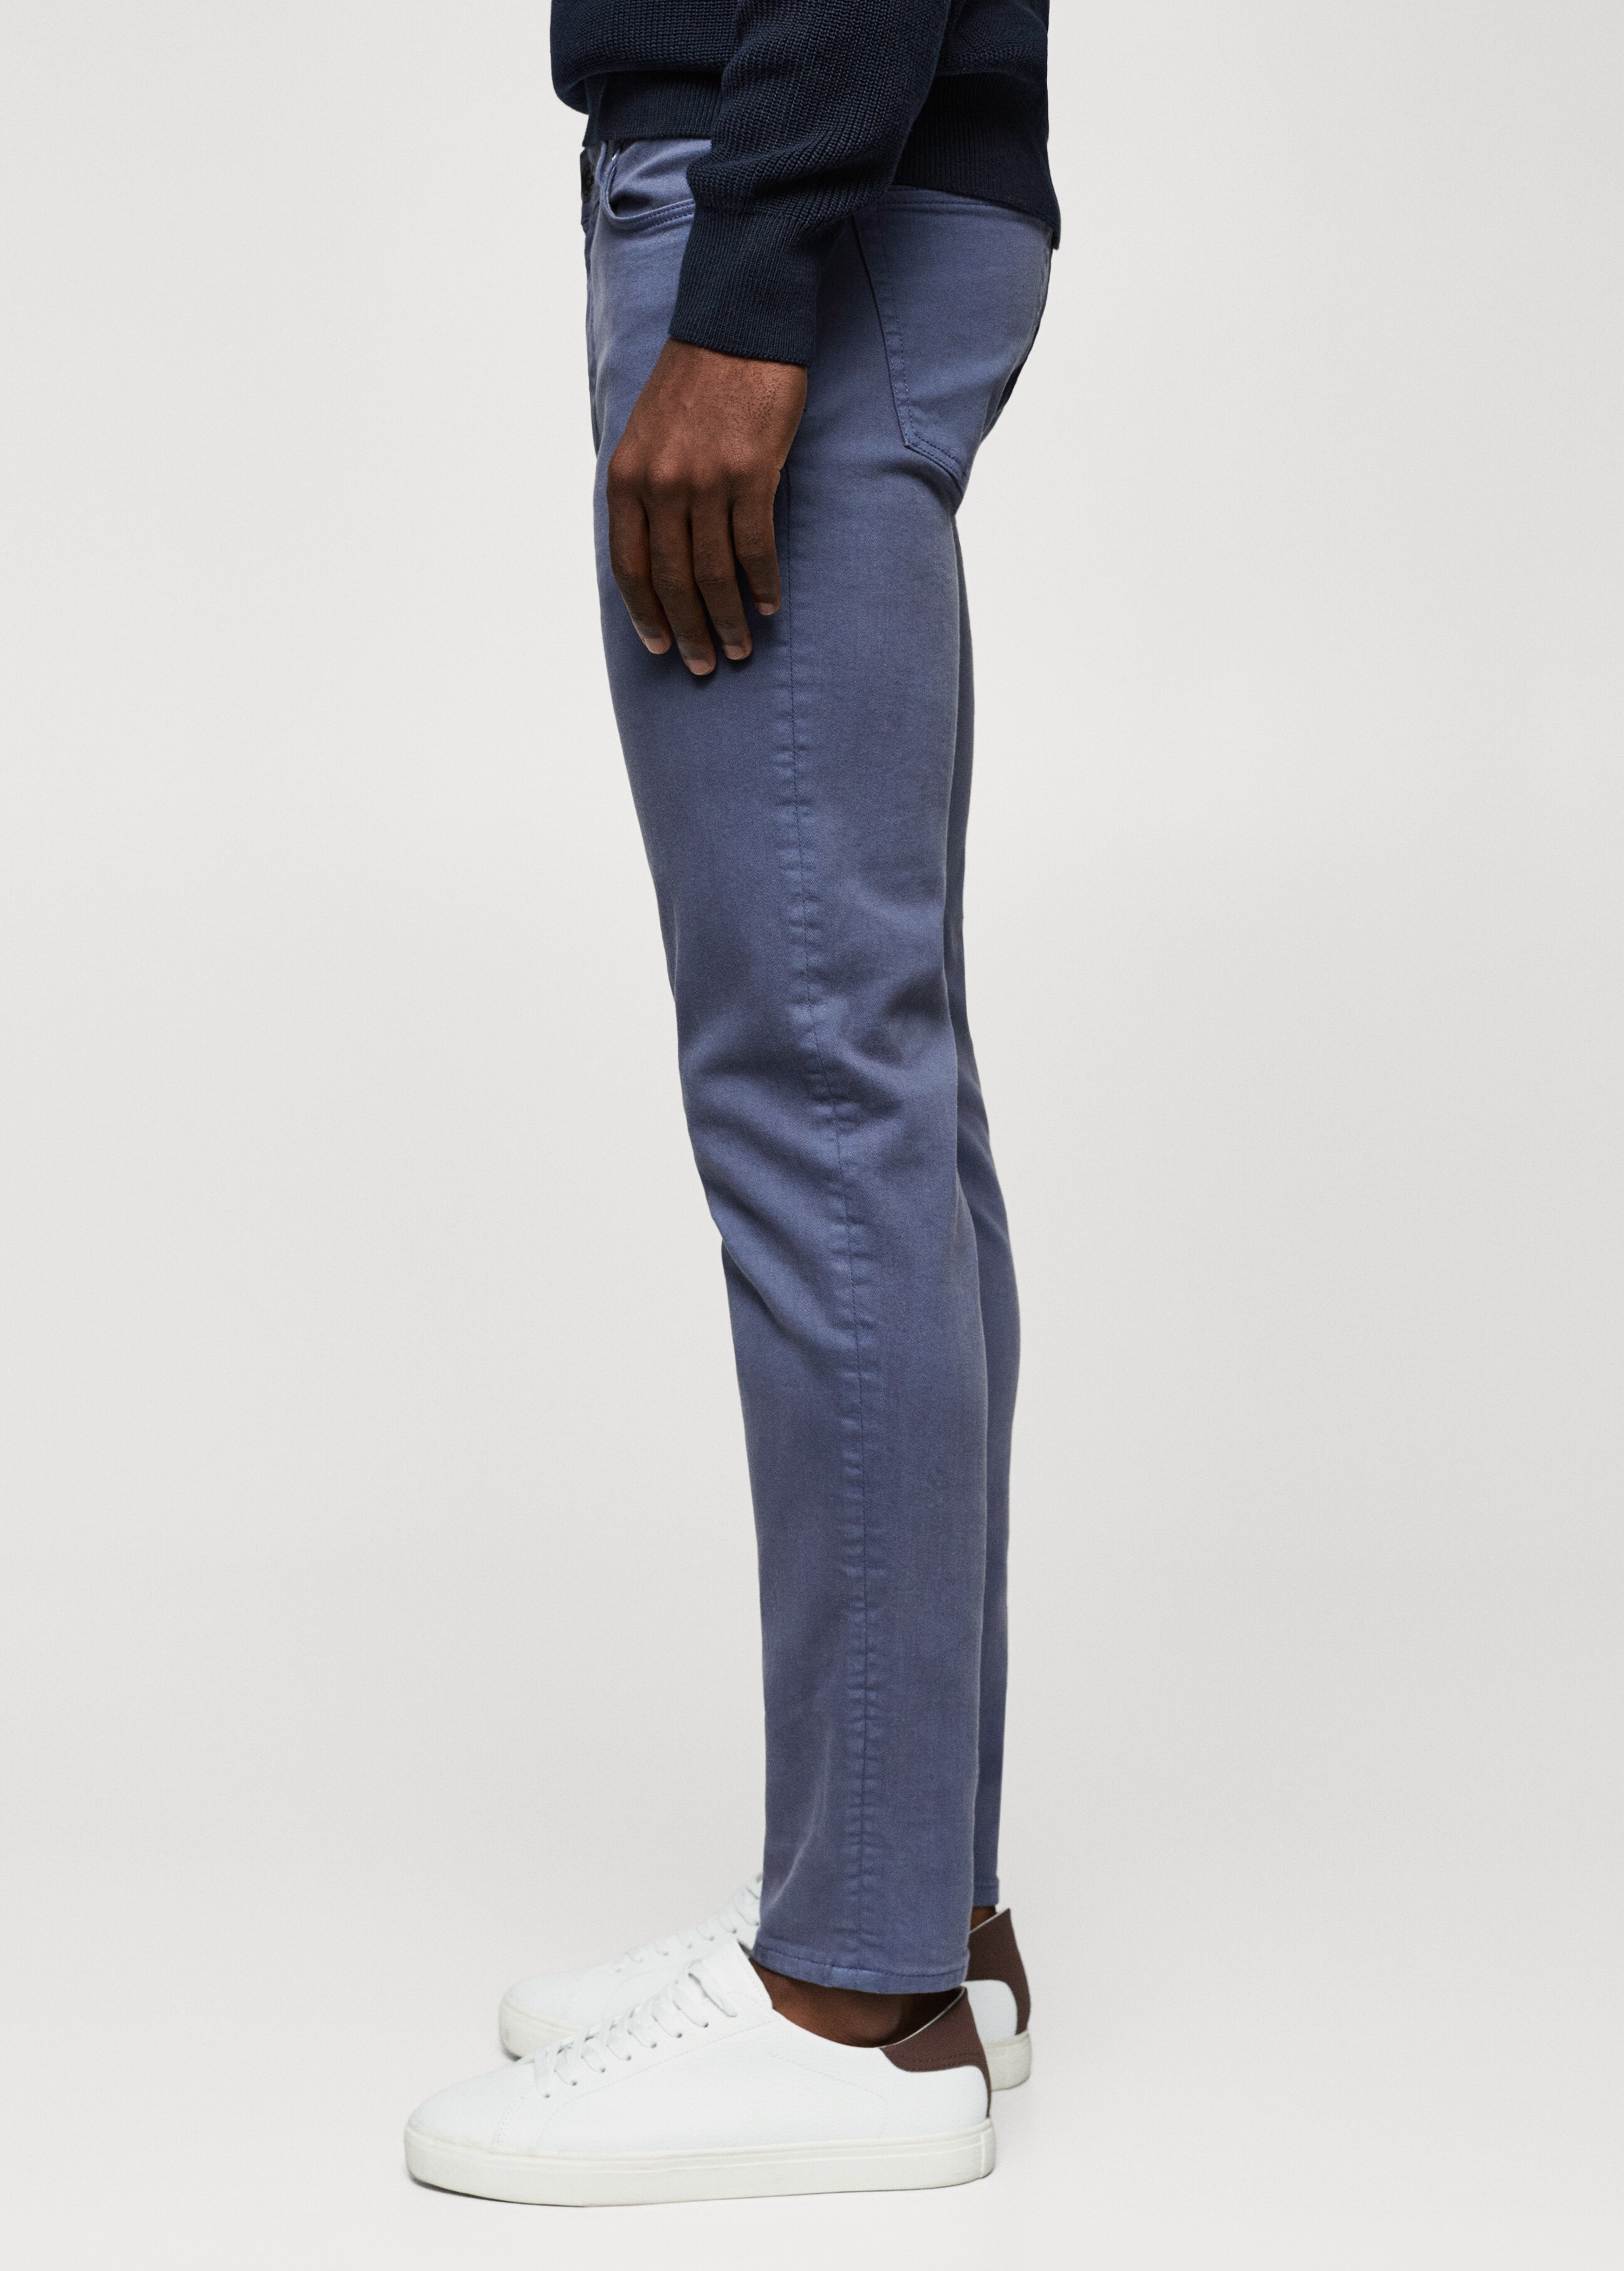 Colour skinny jeans - Details of the article 6